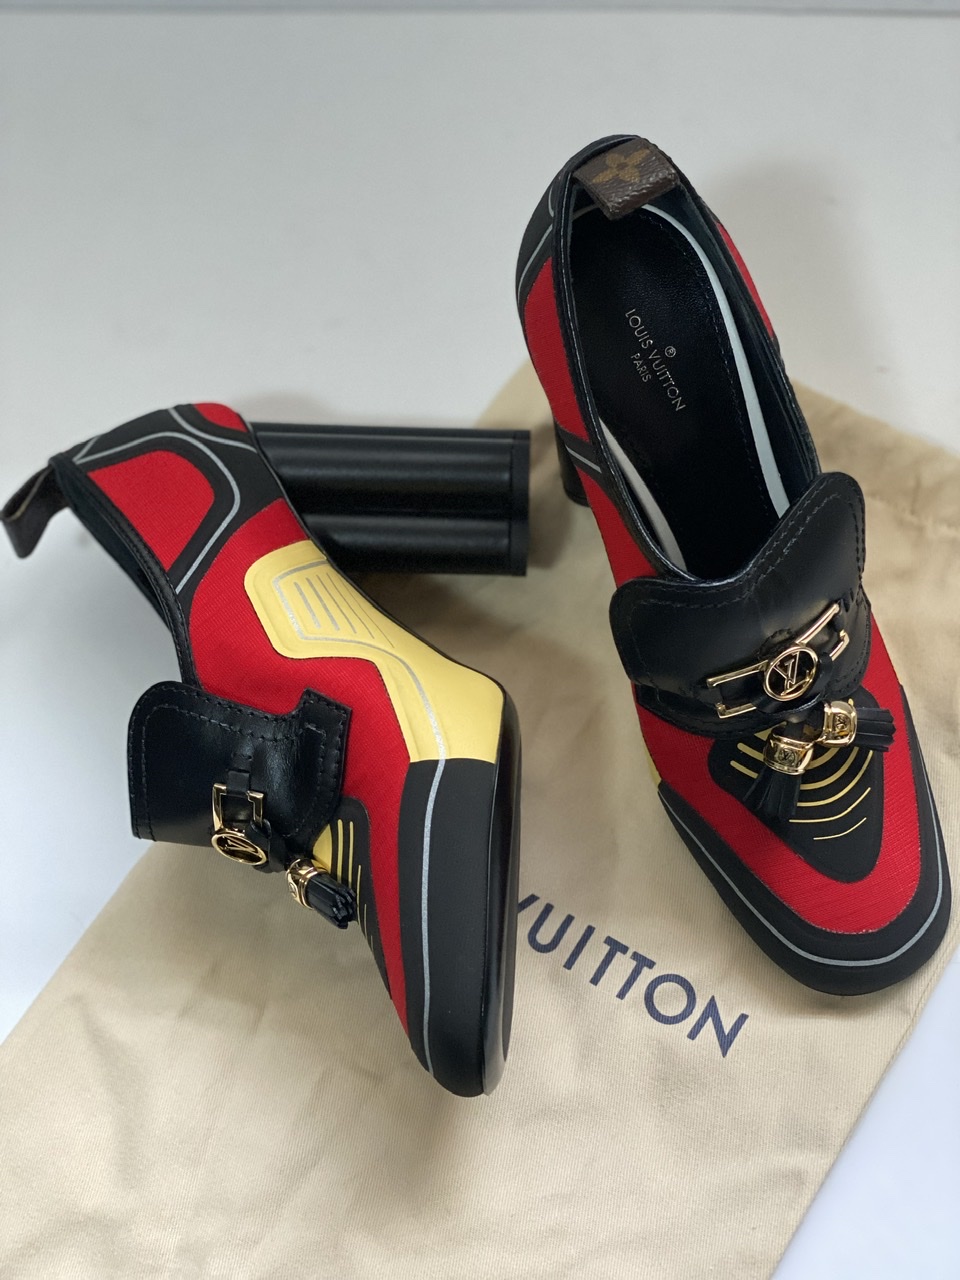 LOUIS VUITTON DRIVER MOCCASIN SHOES 38 RED PATENT LEATHER LOAFERS SHOES  ref.875184 - Joli Closet